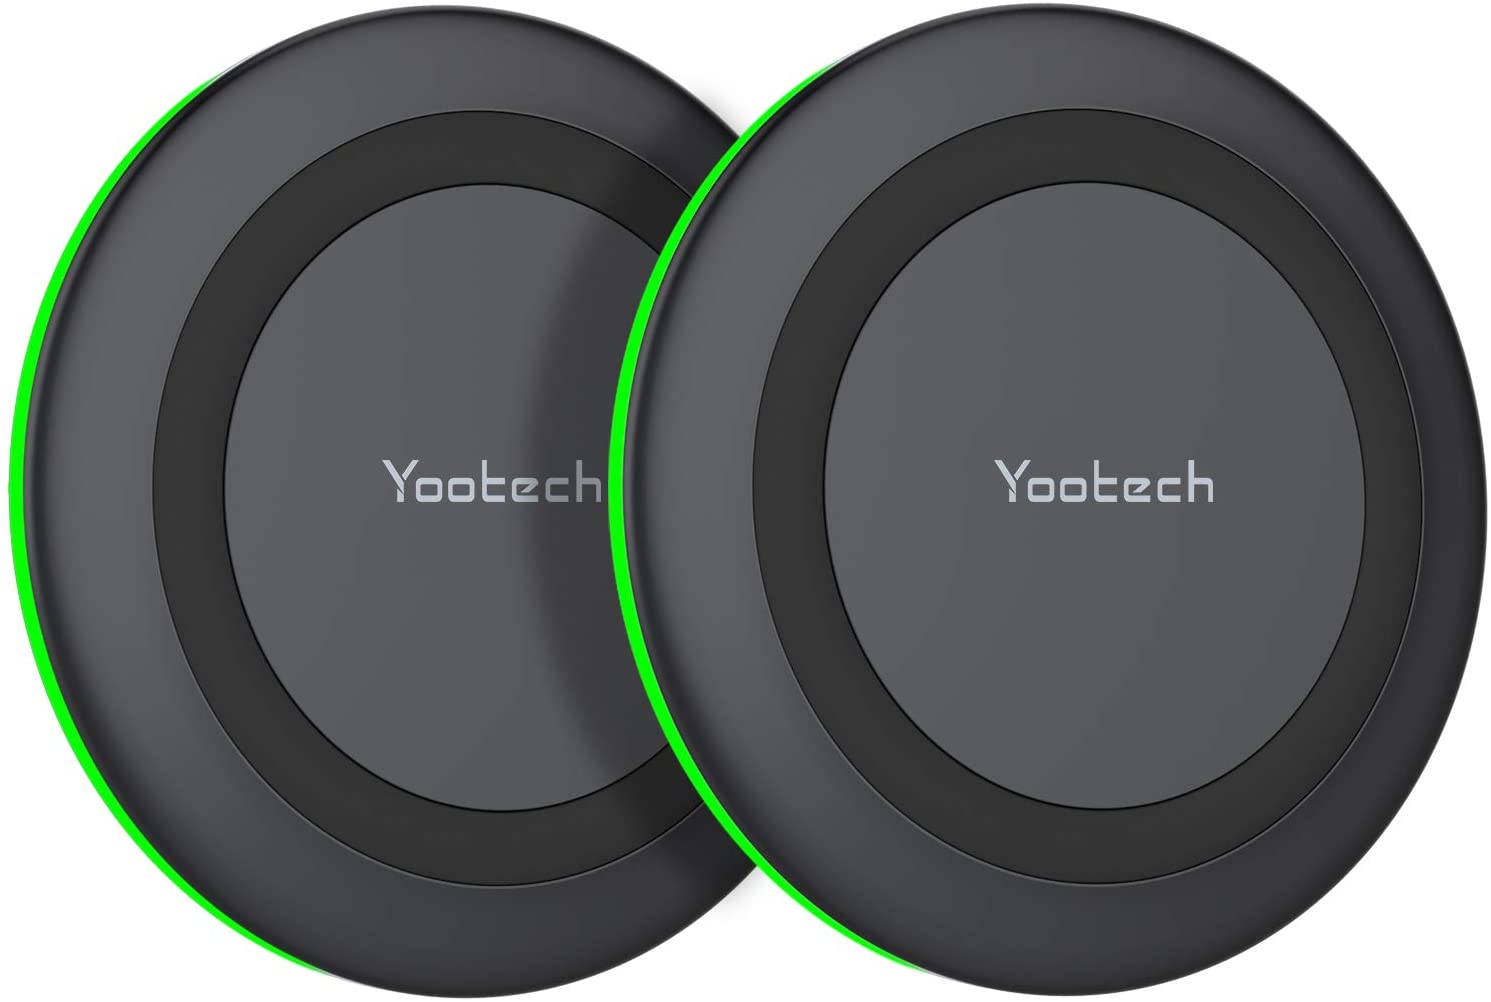 Yootech [2 Pack] Wireless Charger,Qi-Certified 10W Max Wireless Charging Pad 